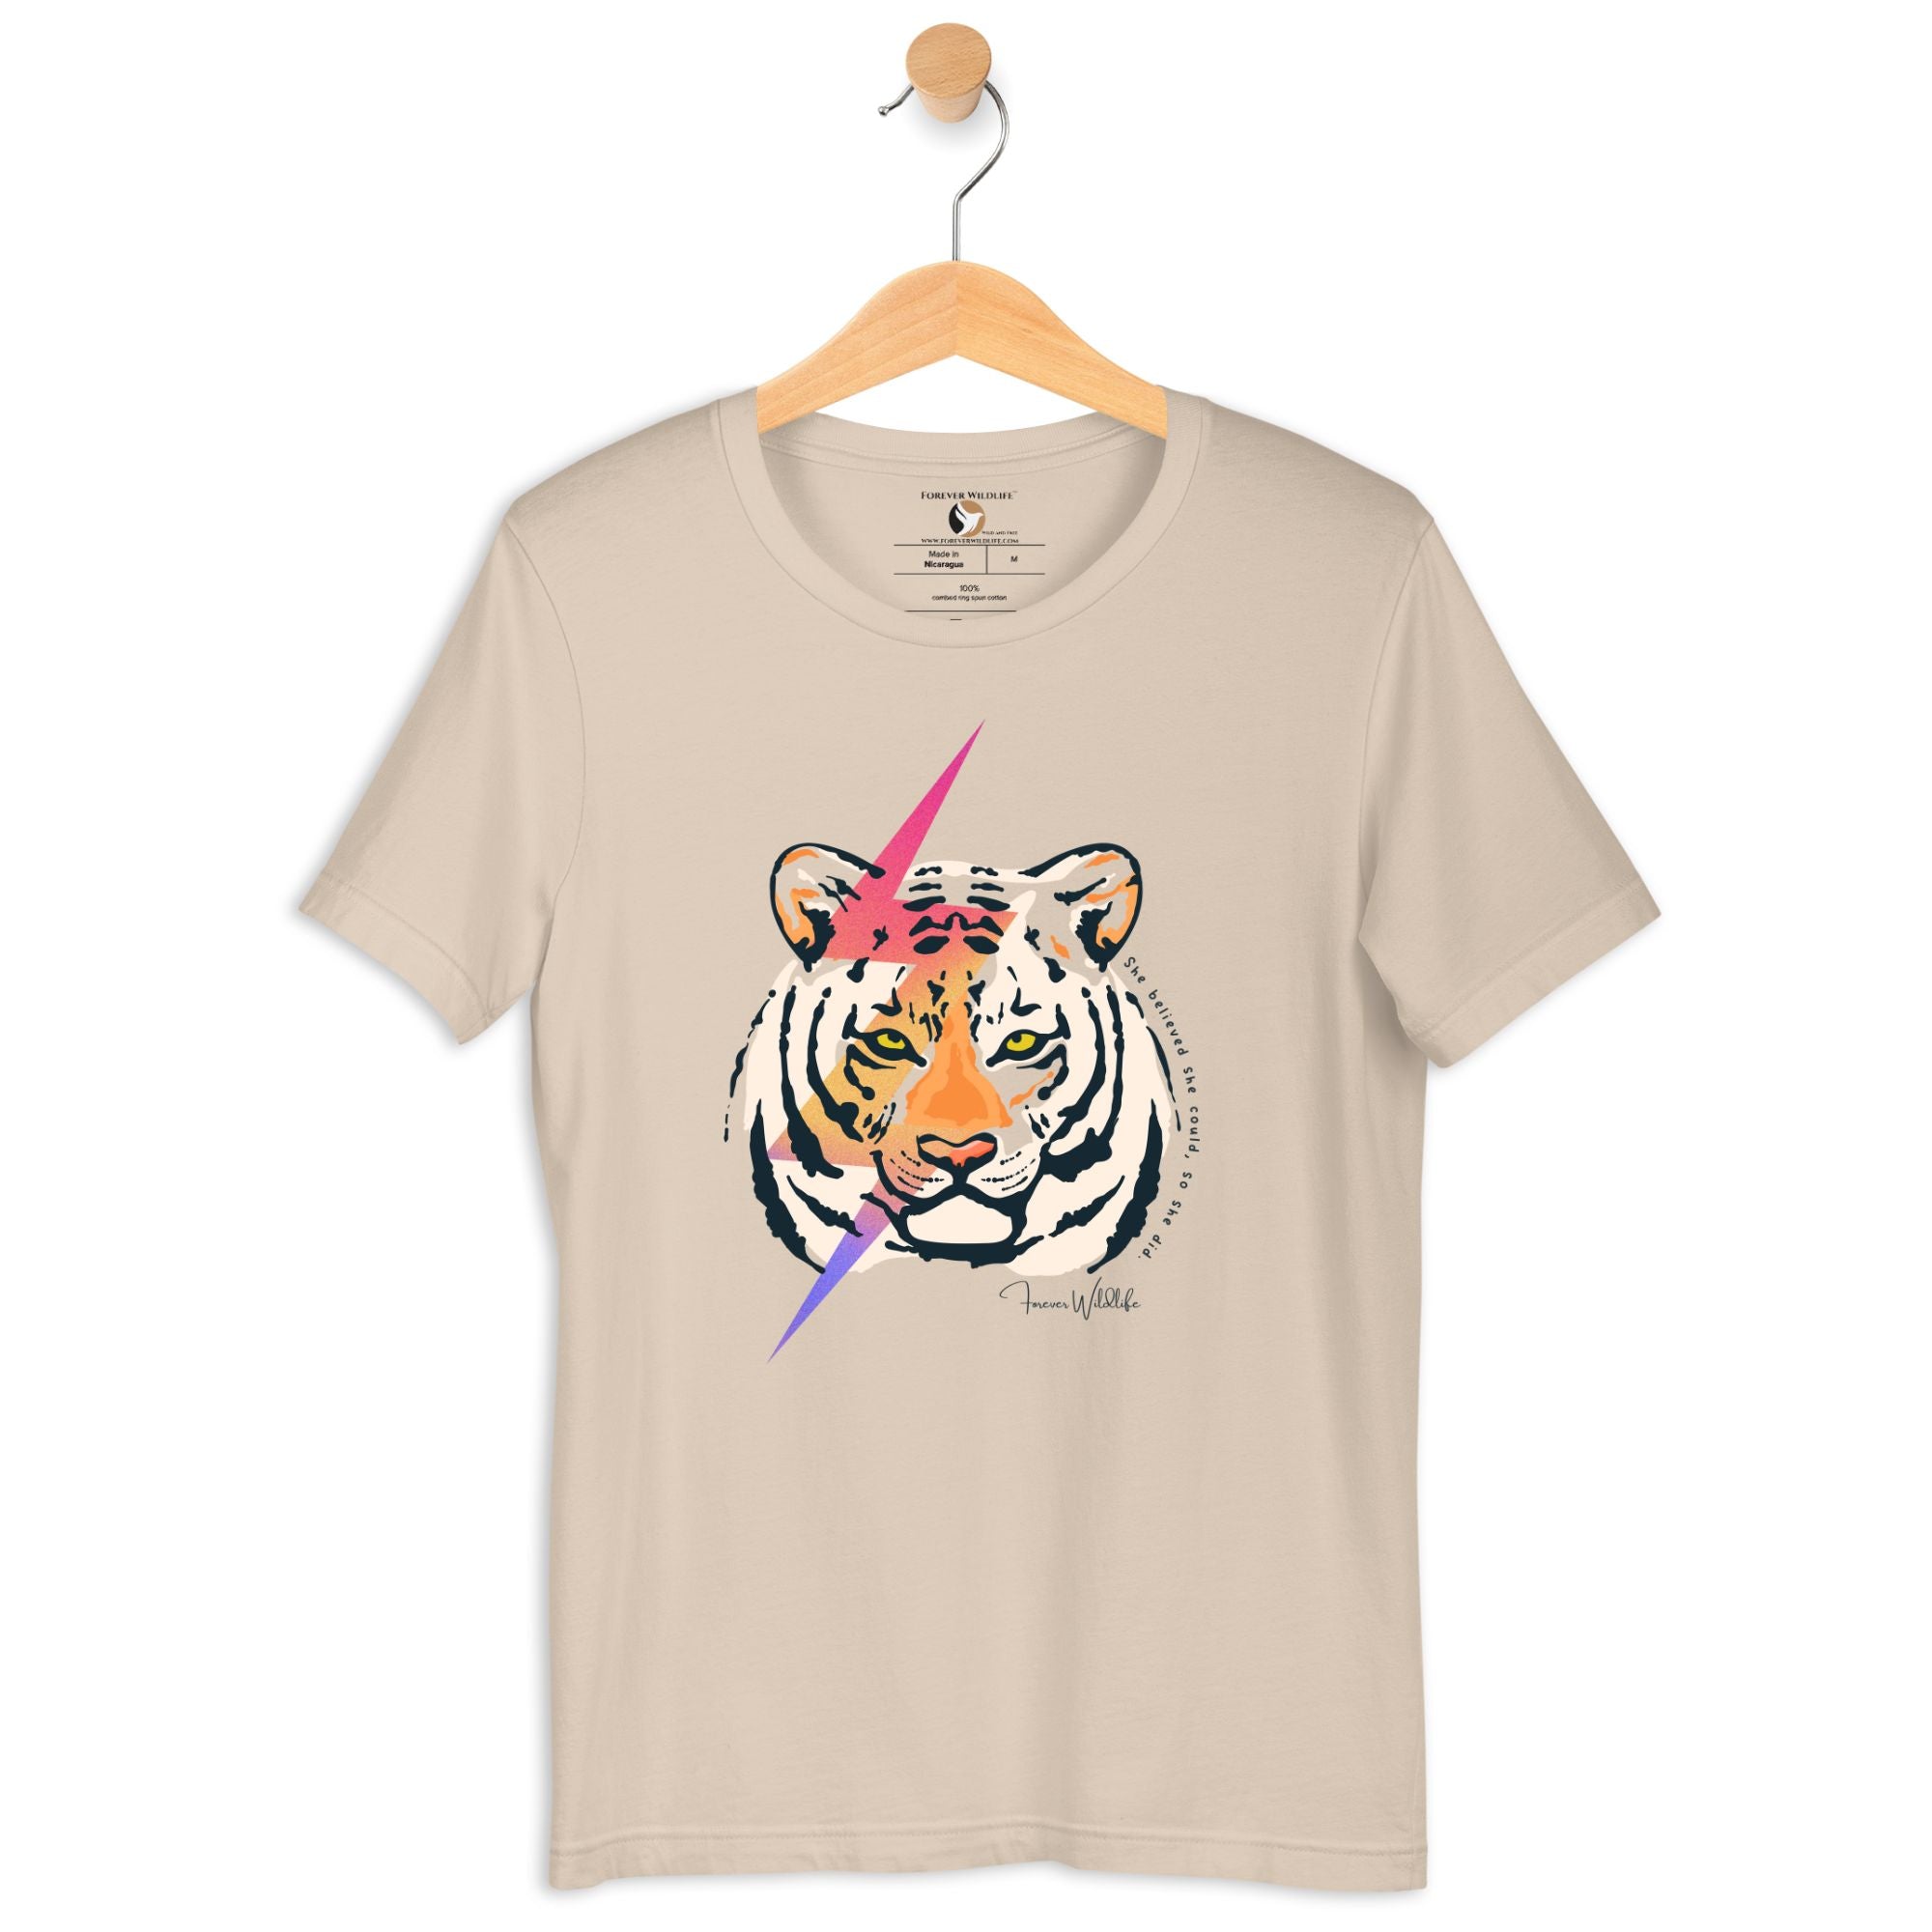 Tiger T-Shirt in Soft Cream – Premium Wildlife T-Shirt Design with She Believed She Could So She Did Text, Tiger Shirts & Wildlife Clothing